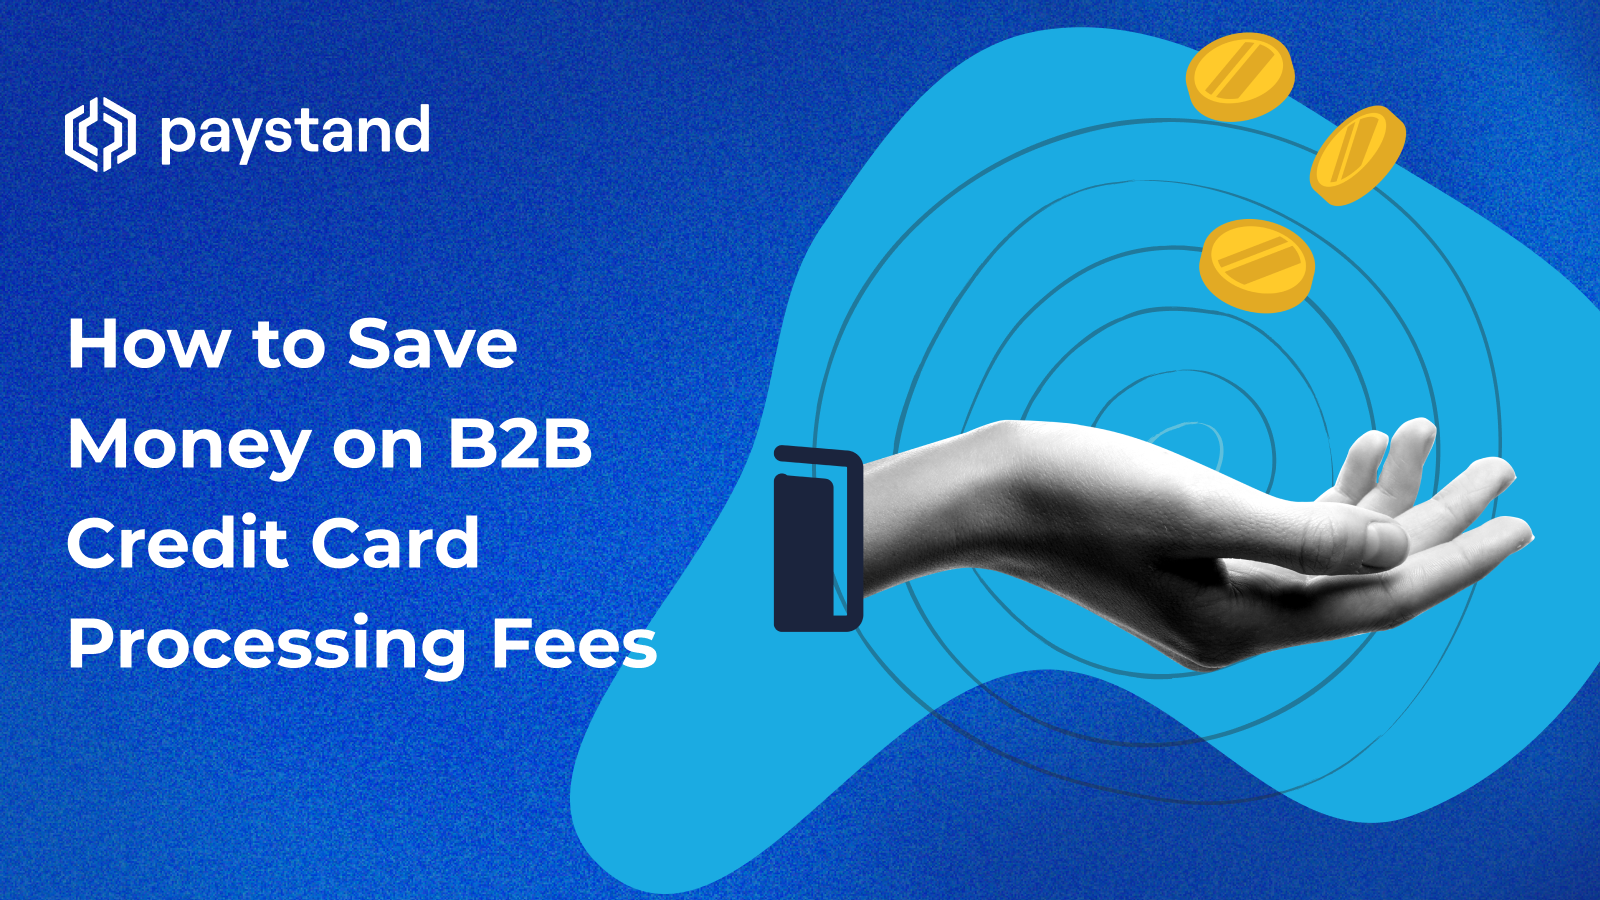 How to Save Money on B2B Credit Card Processing Fees